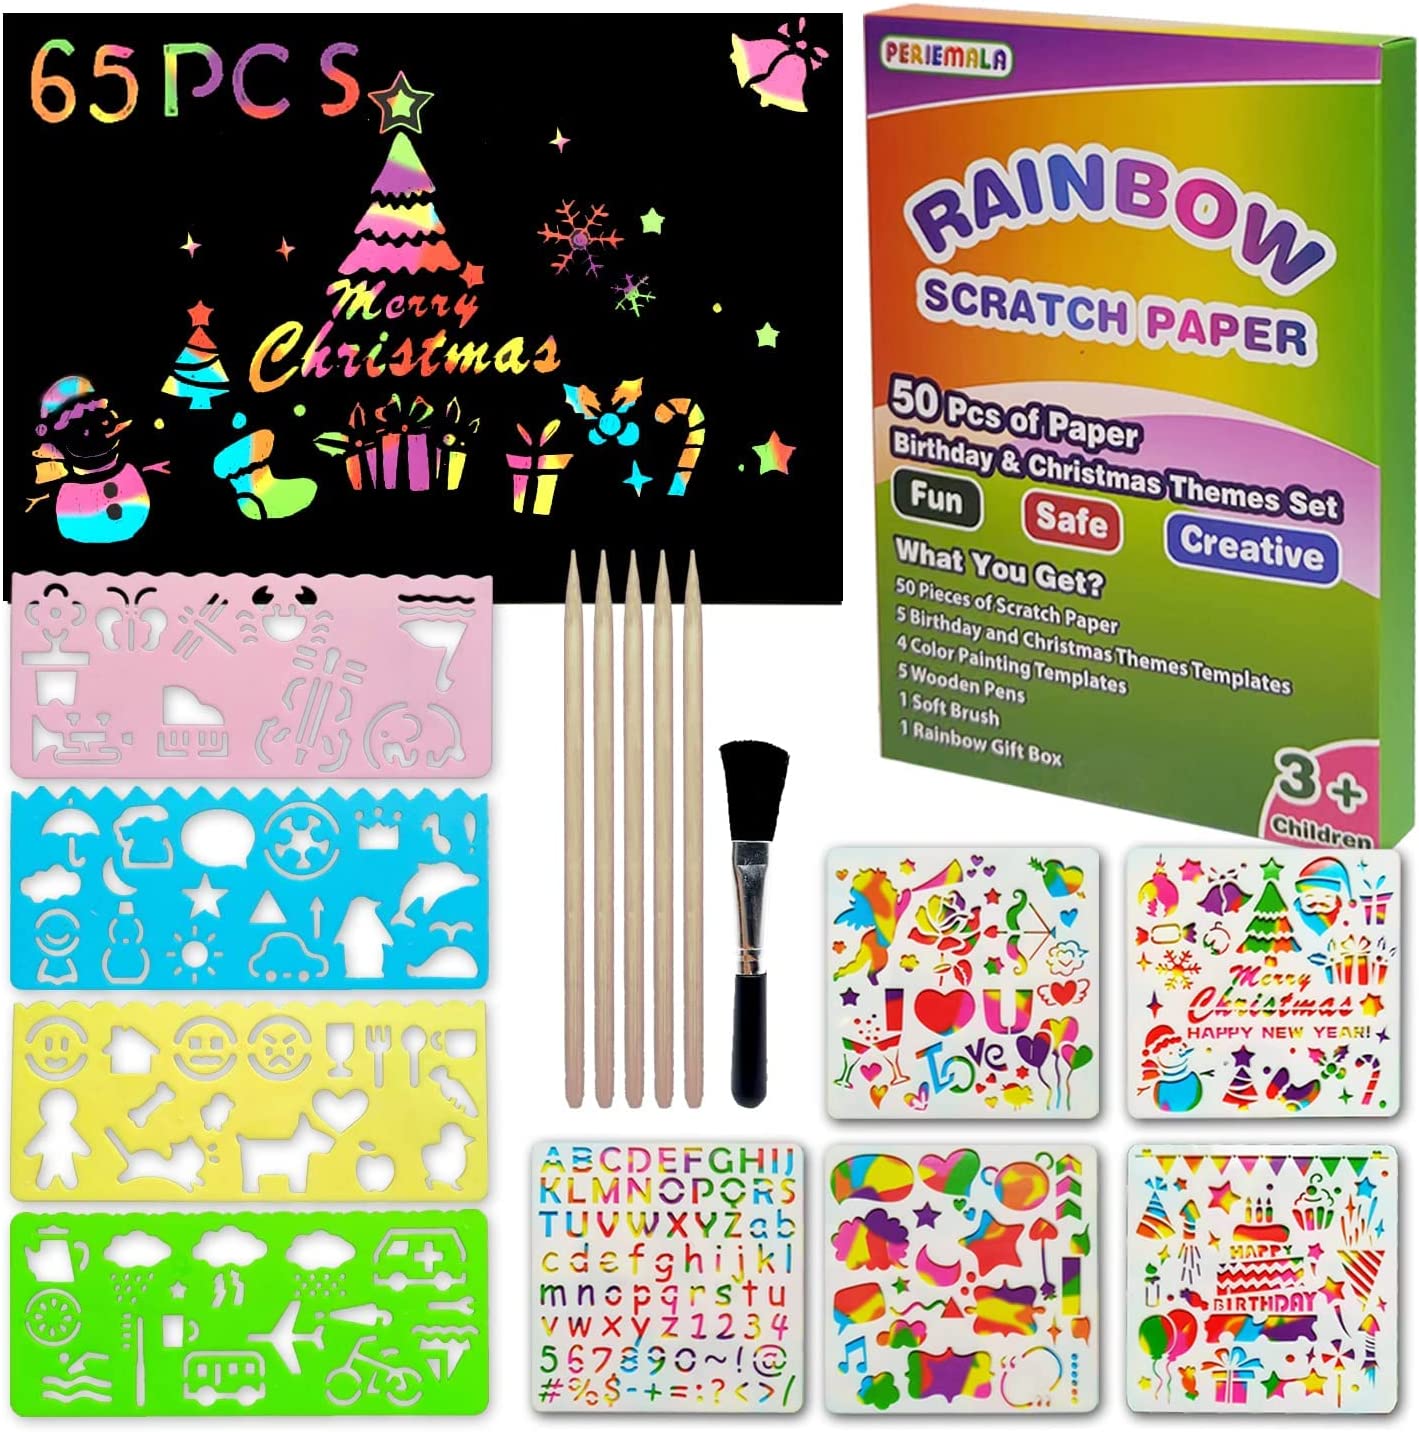 Stencil Drawing Kit for Kids, 25 Pcs Plastic Drawing Stencils with 400+  Shapes, Great Birthday Gift for Boy Girl